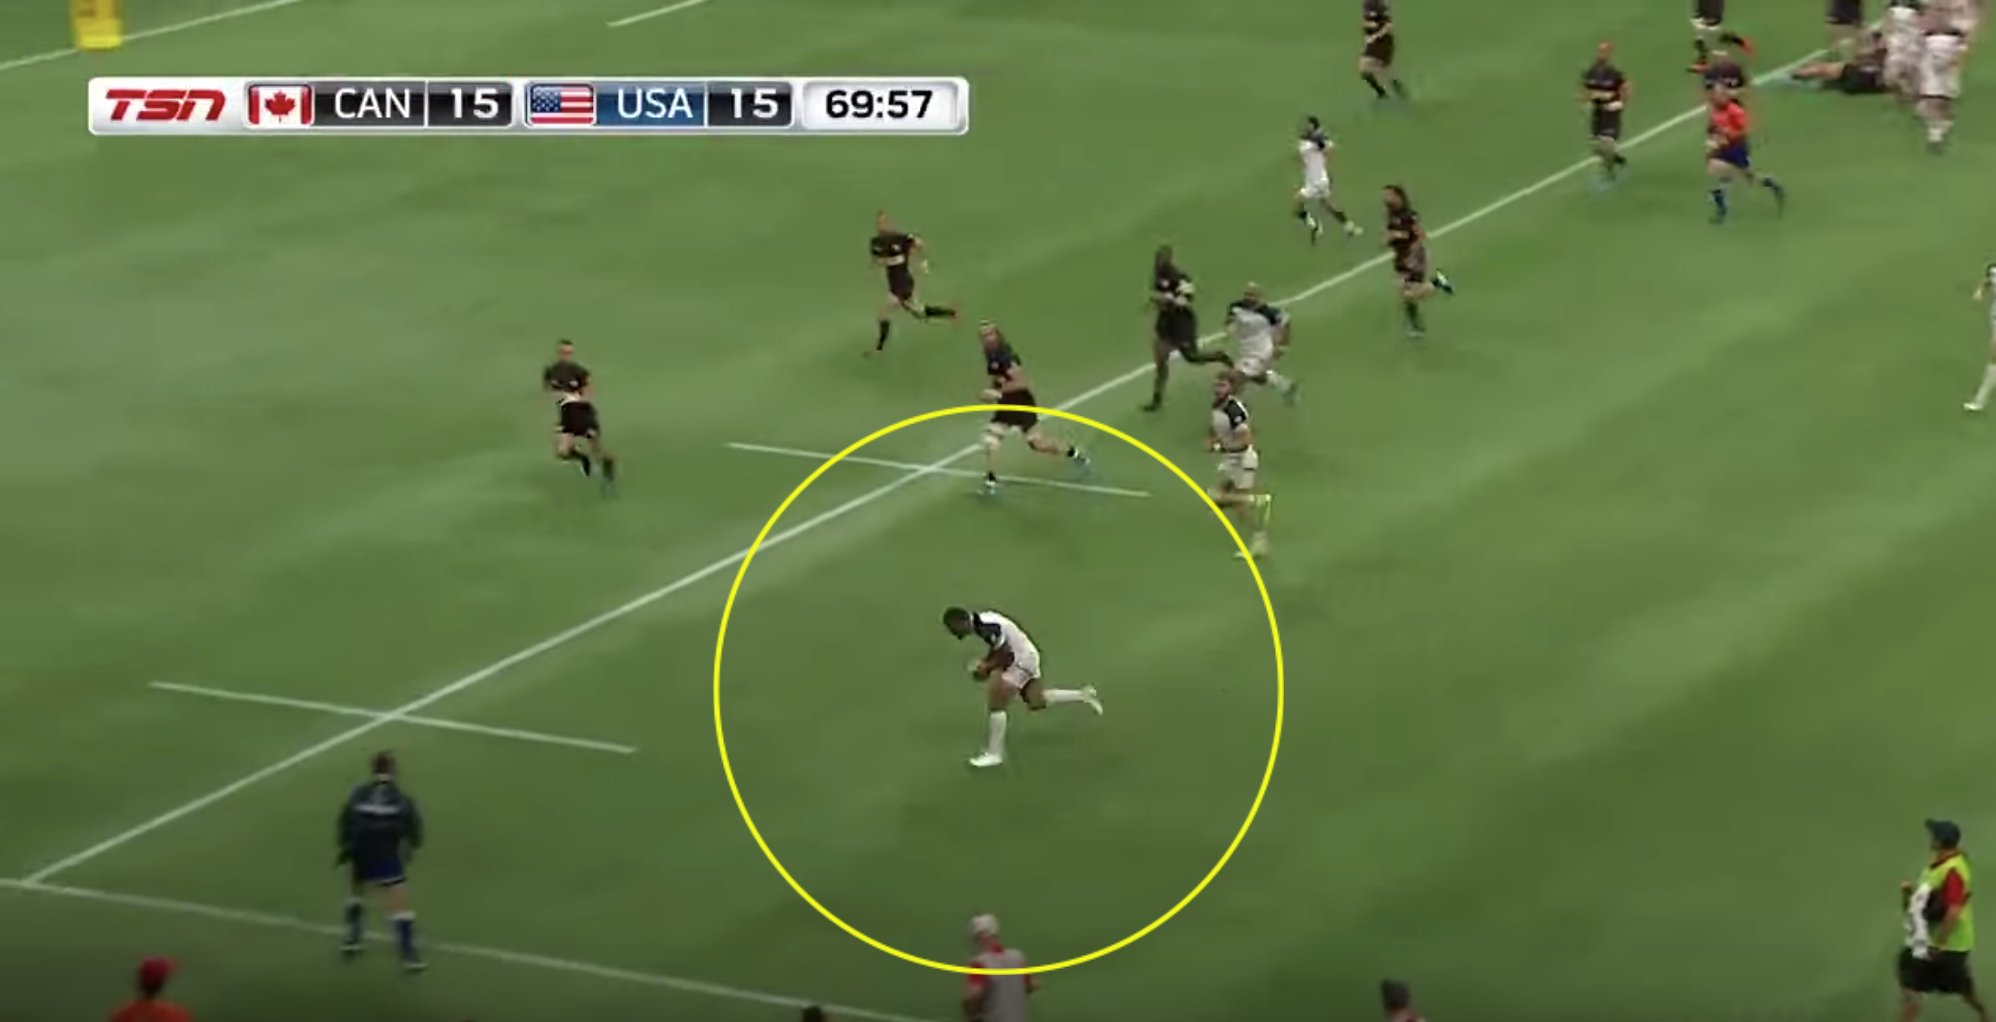 USA winger wins match with one of the biggest BOOMFA hits we've seen